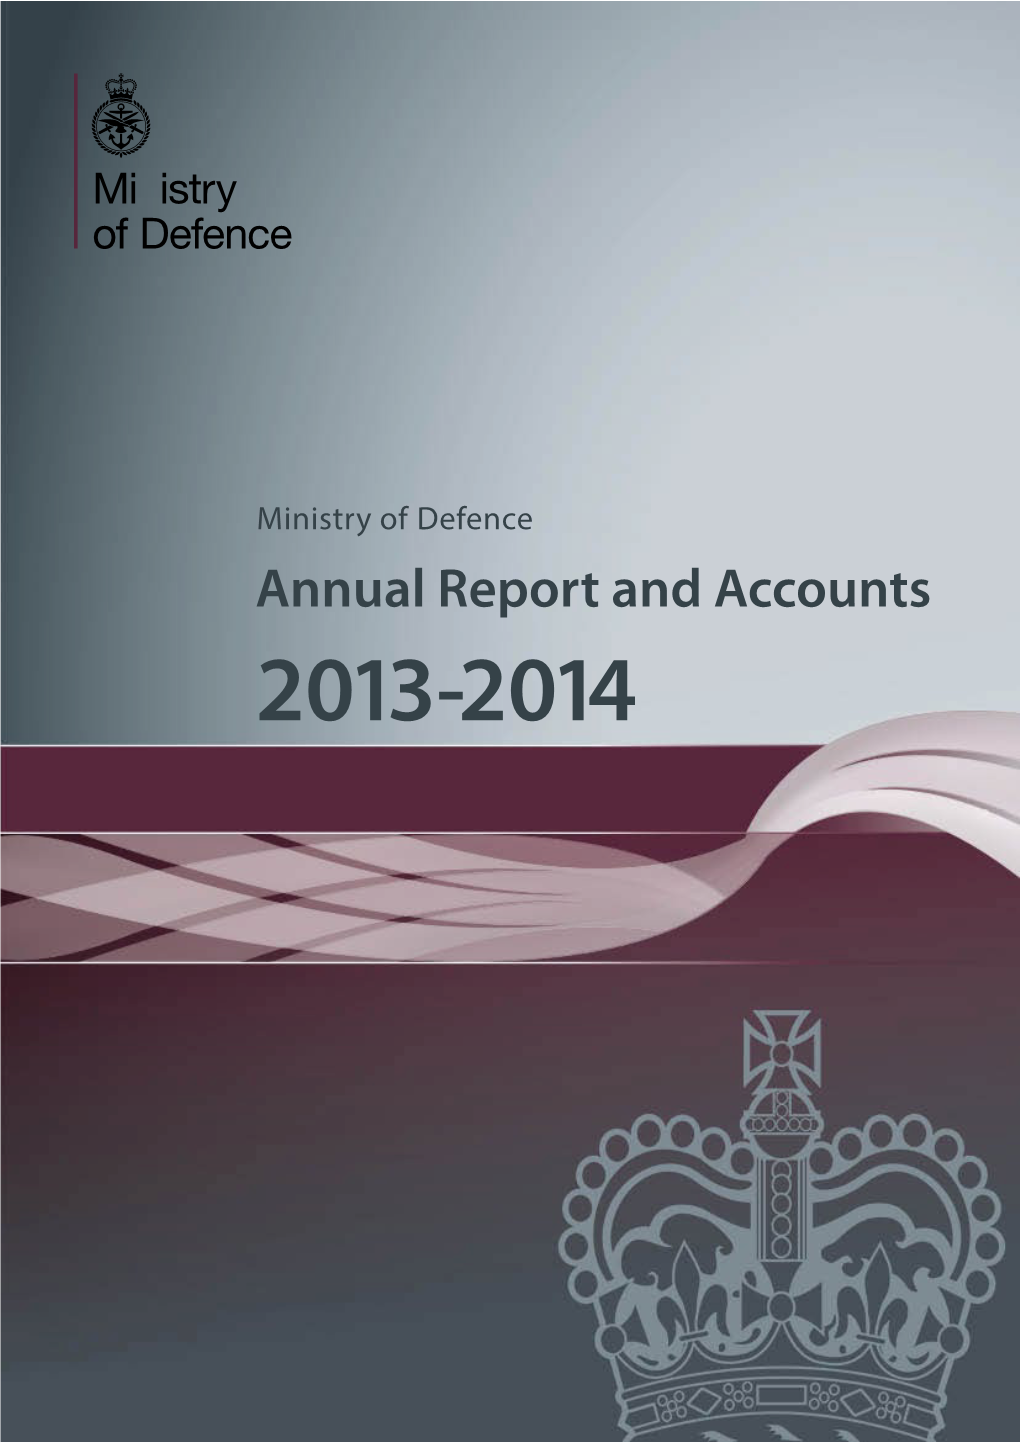 MOD Annual Report and Accounts 2013-2014